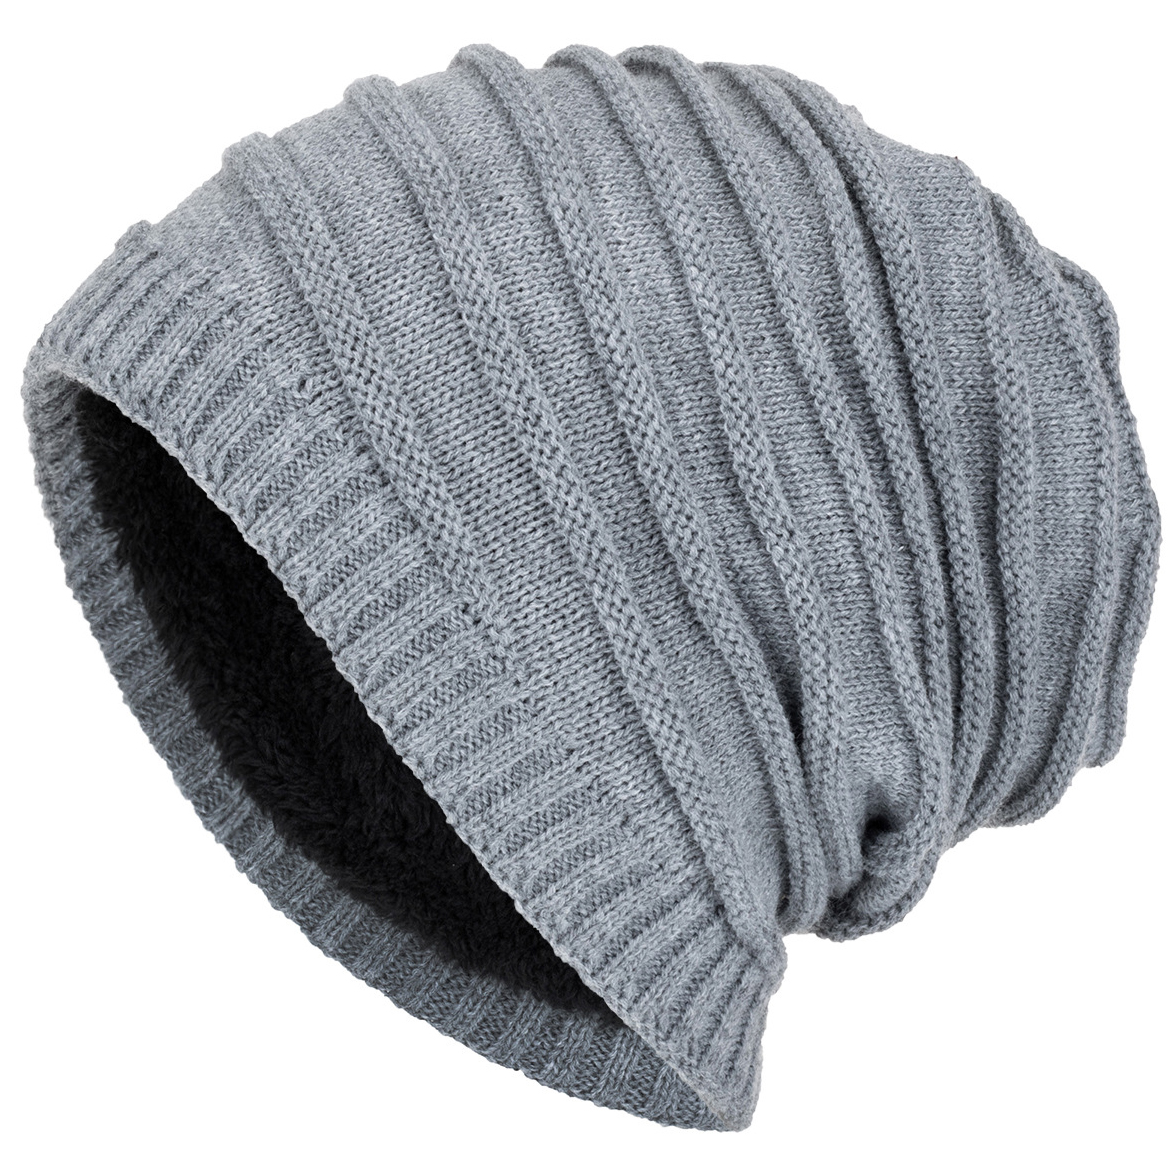 Men's Outdoor Warm Knitted Chic Ear Protection Cap